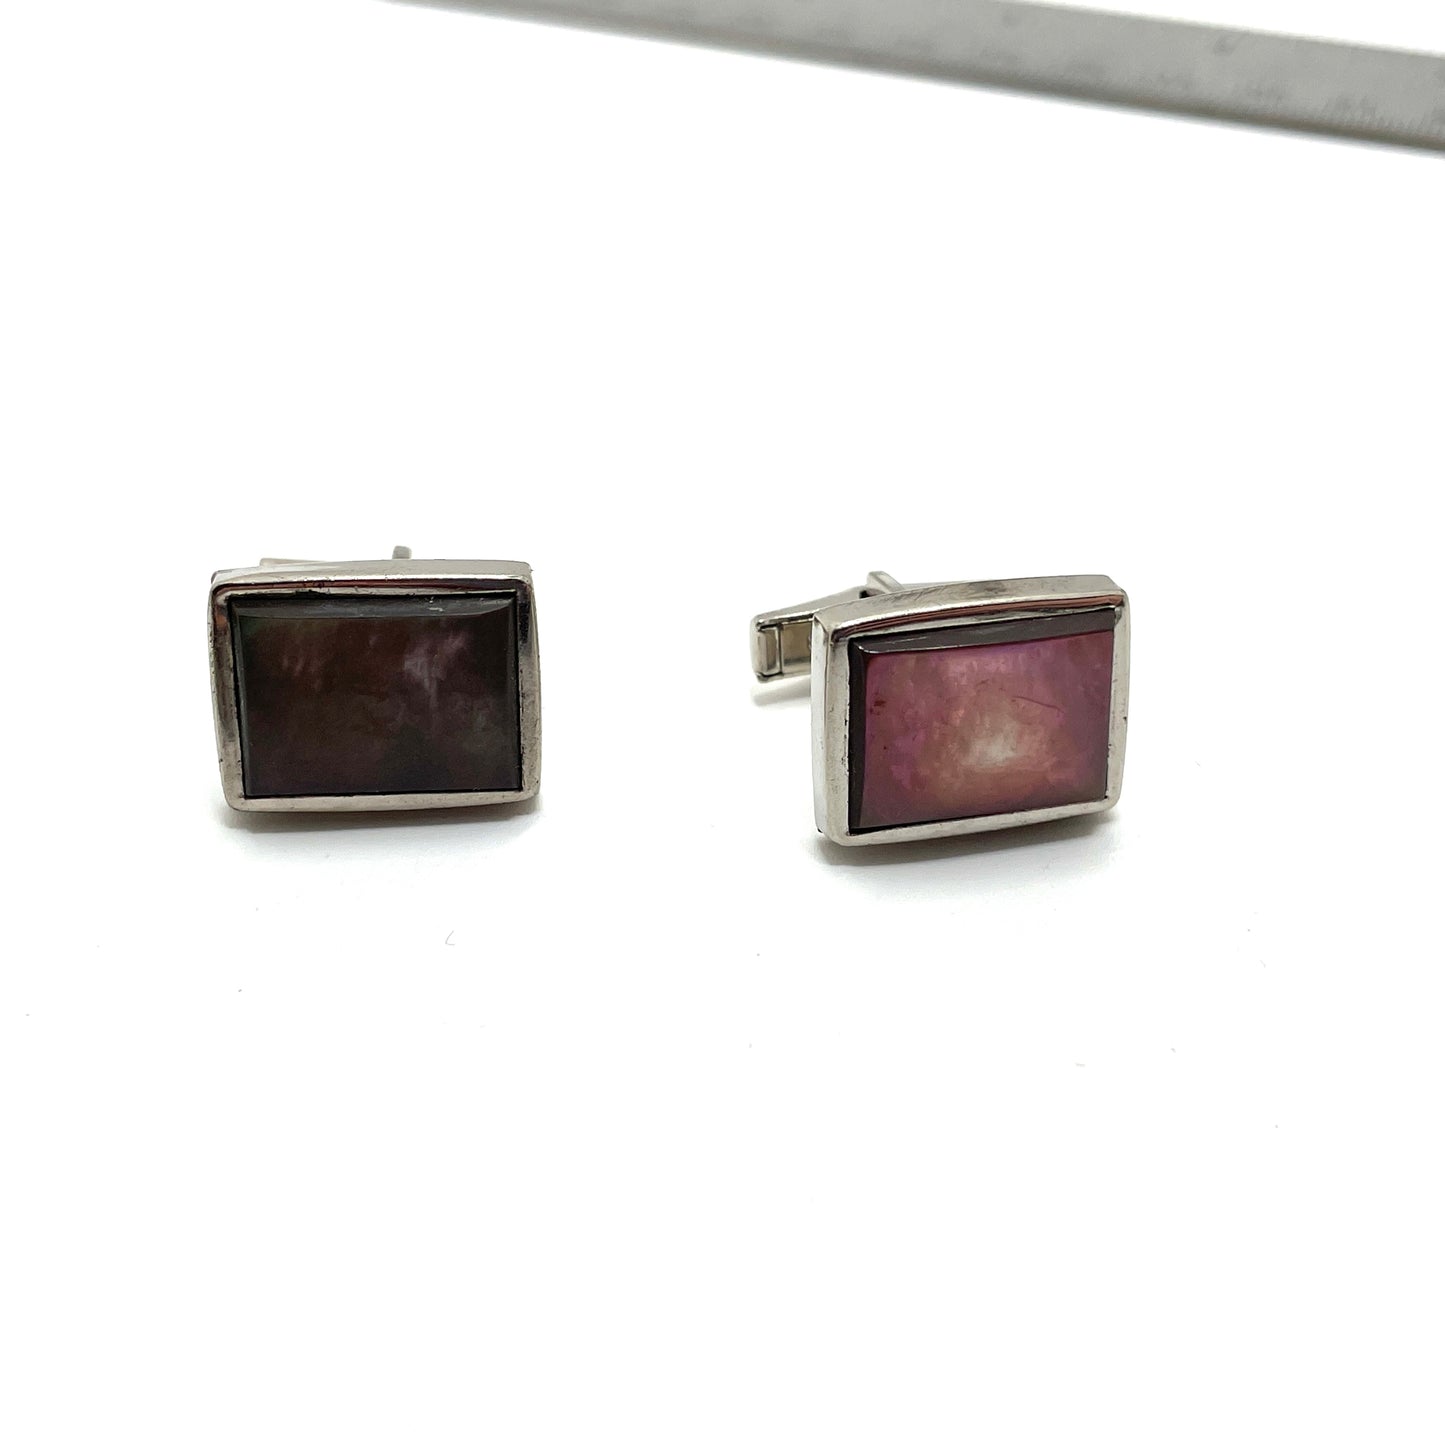 Vintage Sterling Silver Cufflinks with Abalone